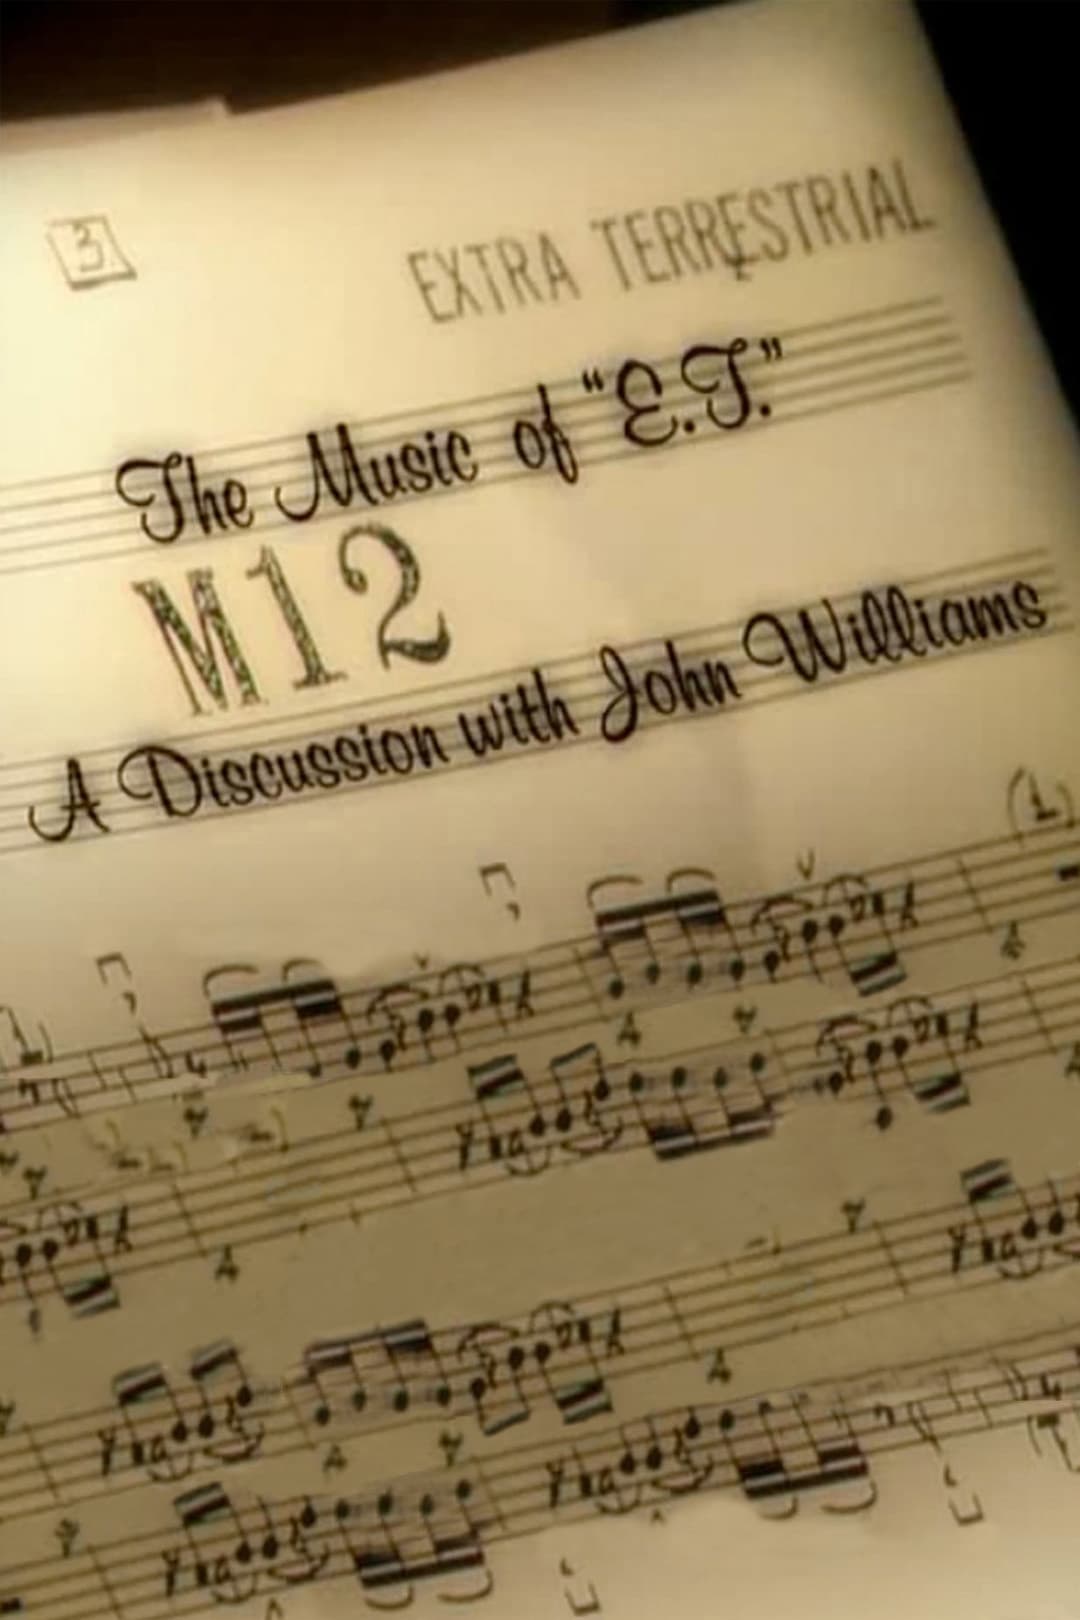 The Music of 'E.T.' A Discussion with John Williams